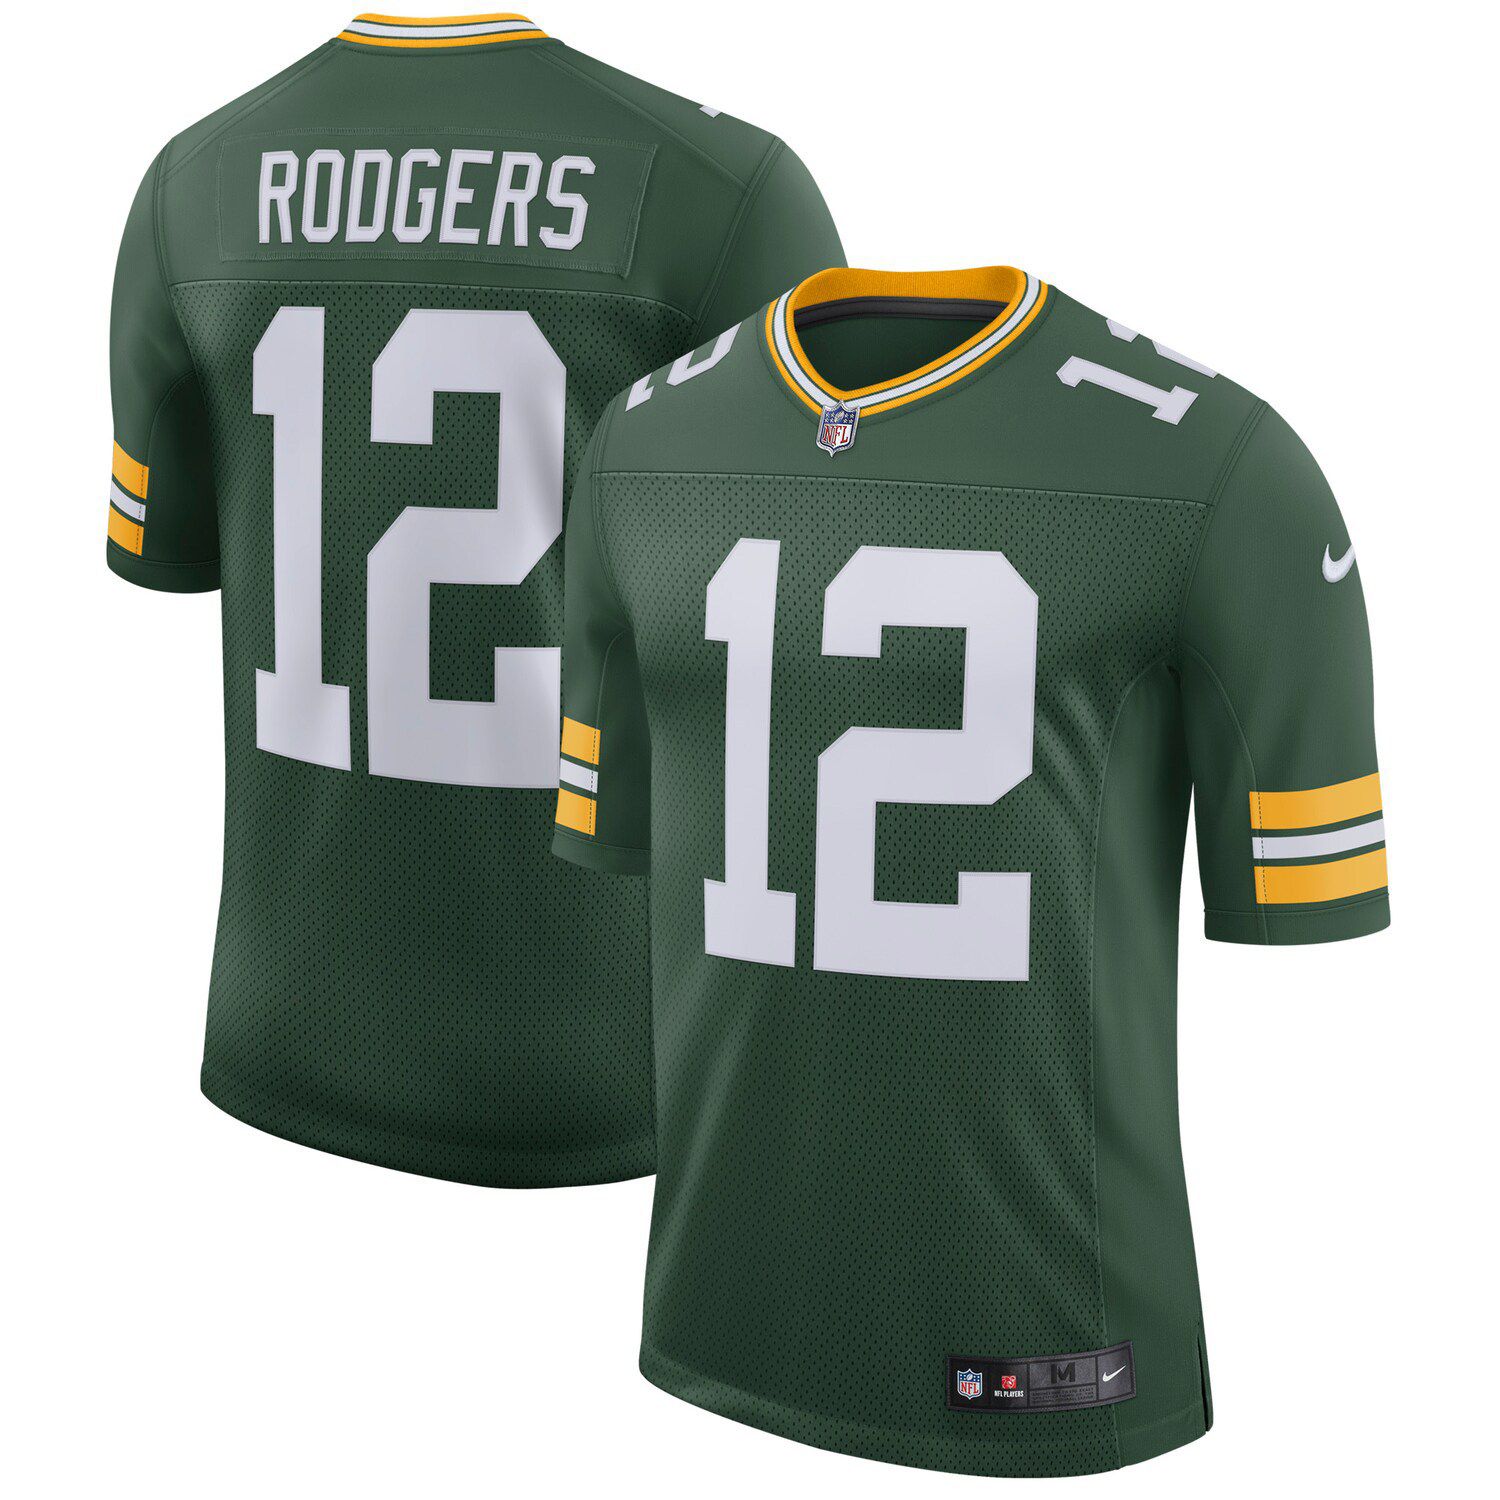 aaron rodgers jersey mens small